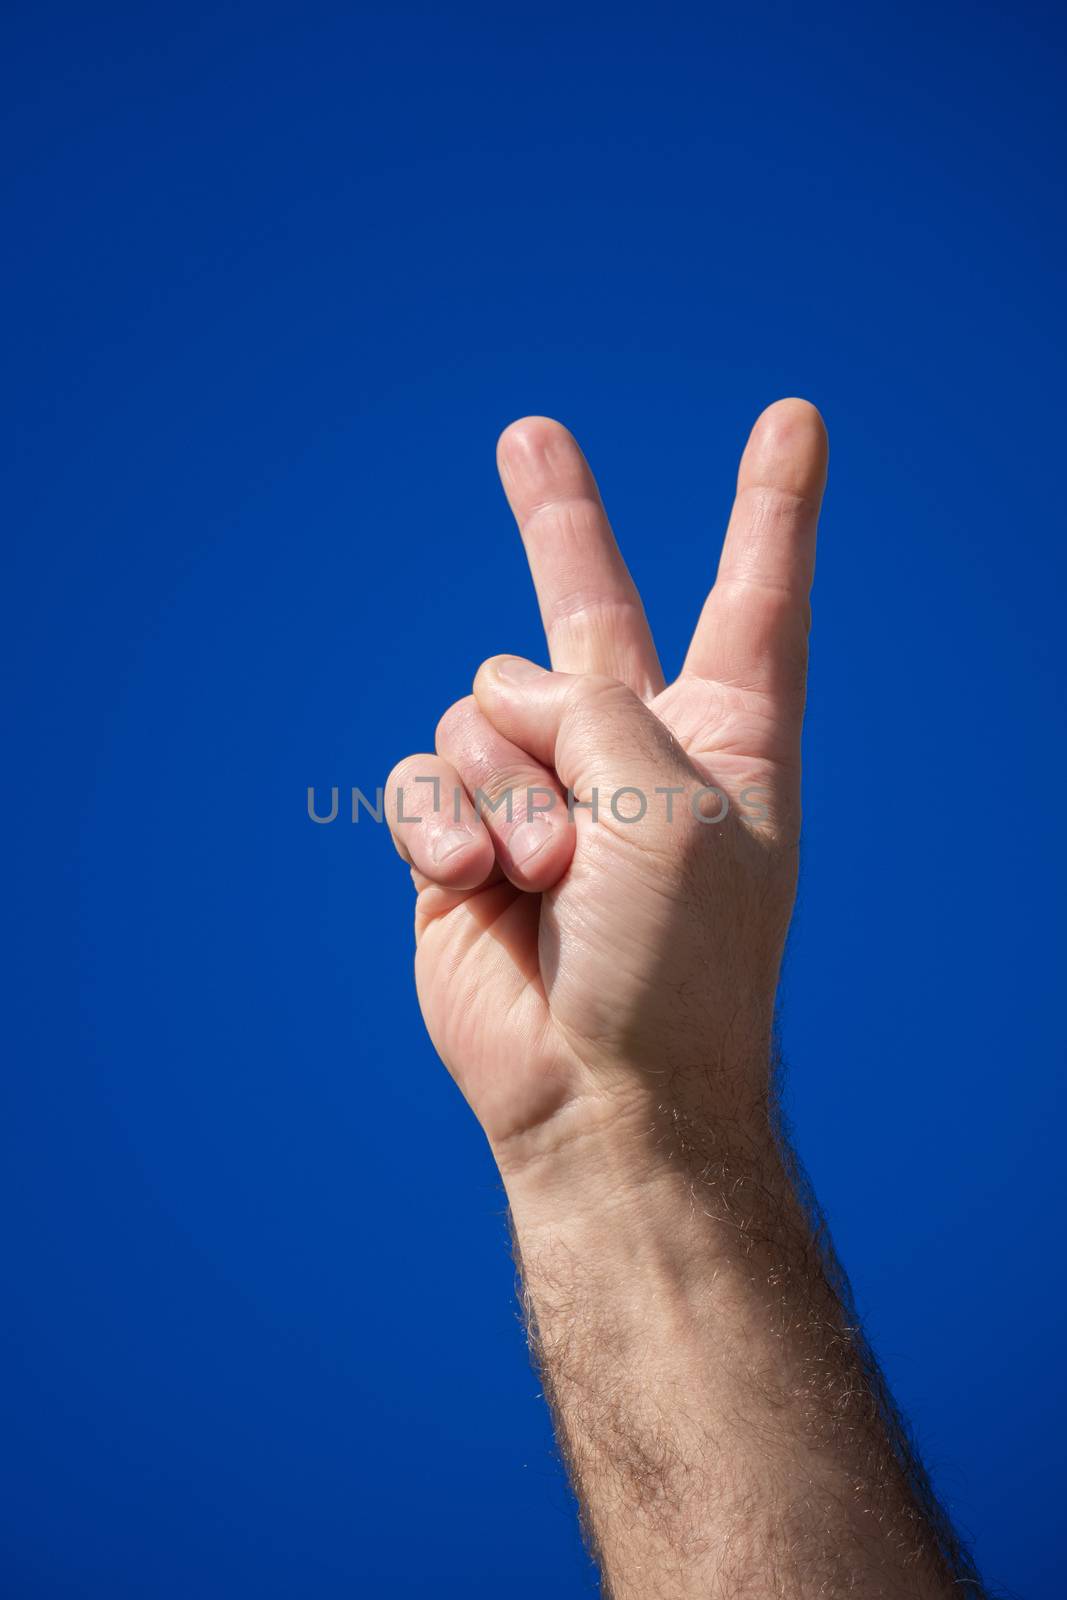 An image of a male hand V sign